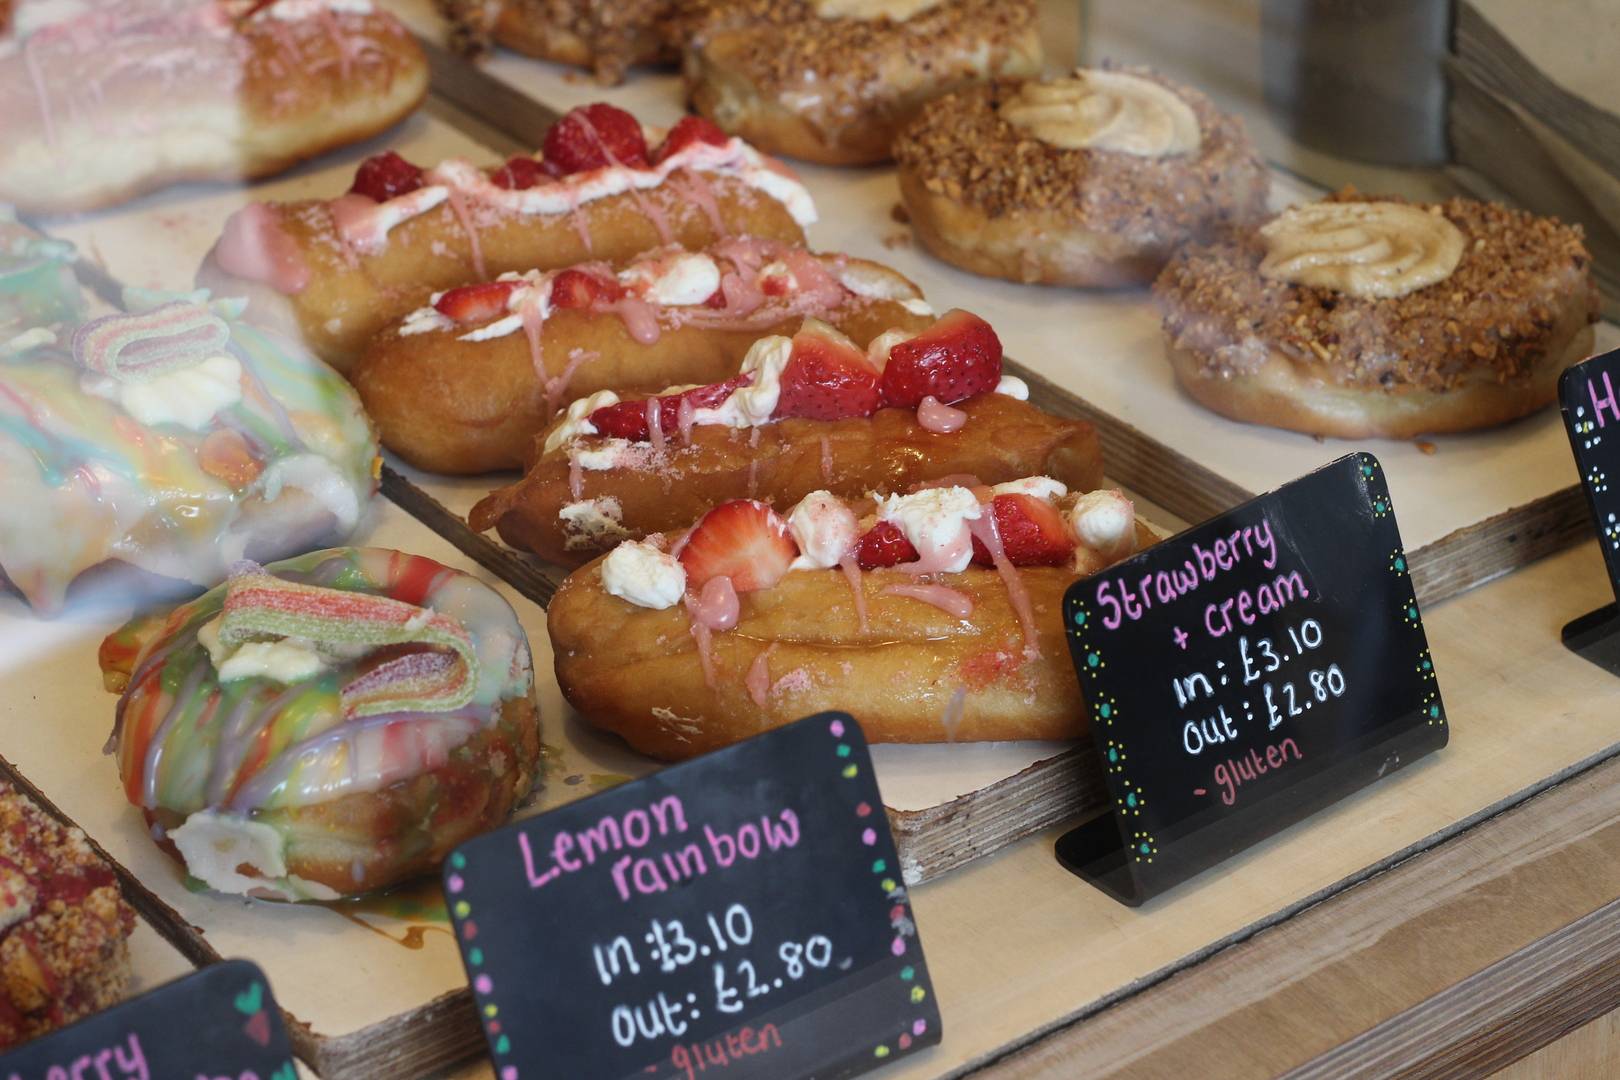 Image of donut display behind glass